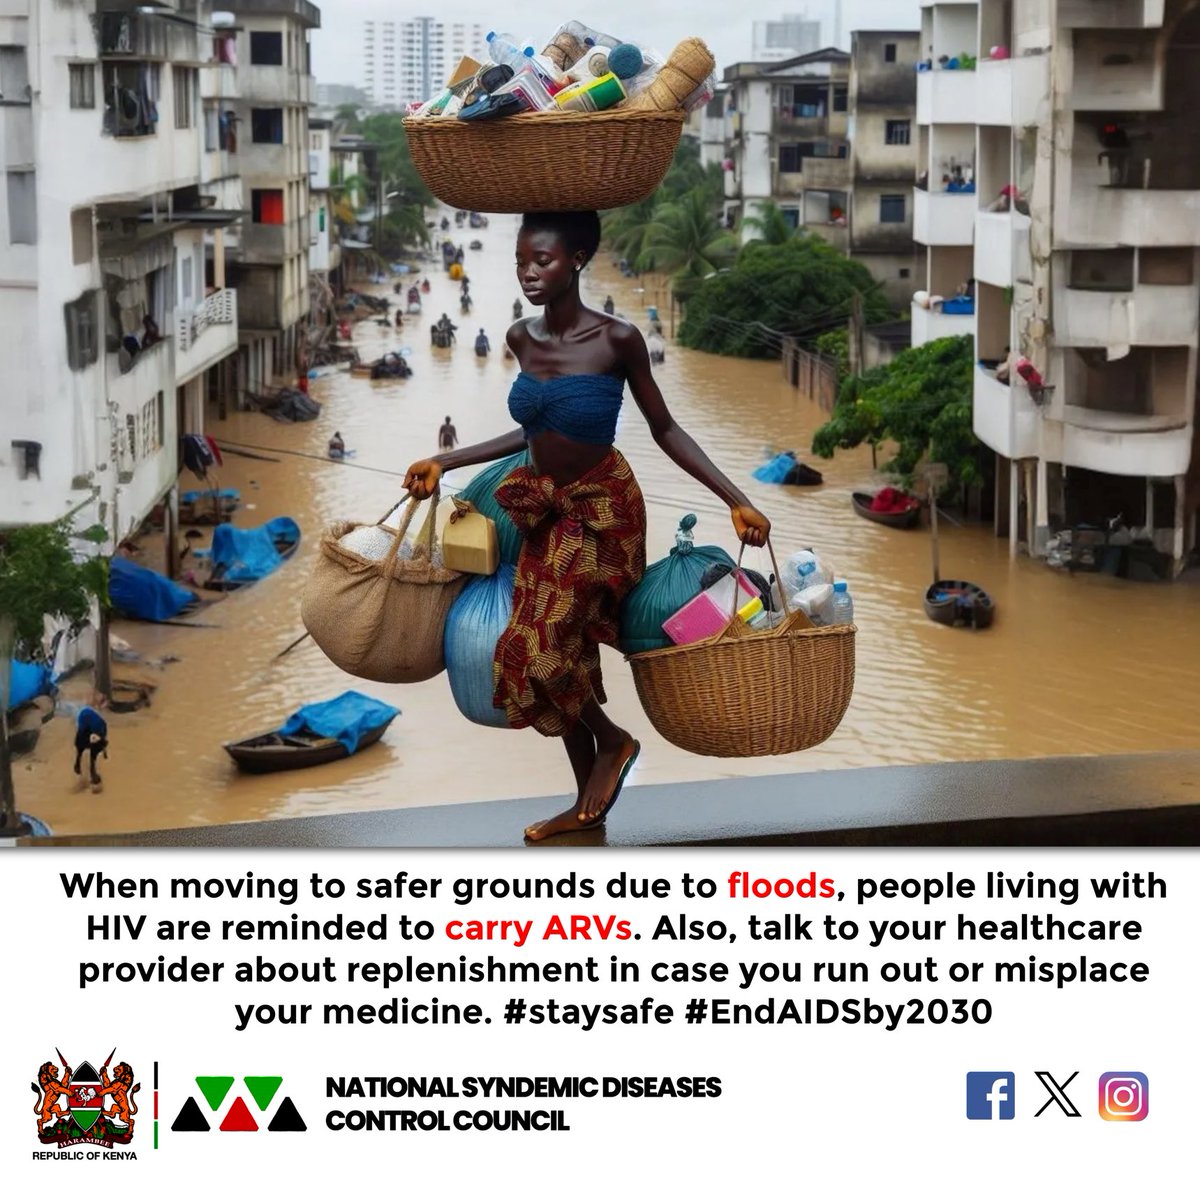 When moving to safer grounds due to floods, people living with HIV are reminded to carry ARVs. Also, talk to your healthcare provider about replenishment in case you run out or misplace your medicine. #staysafe #EndAIDSby2030